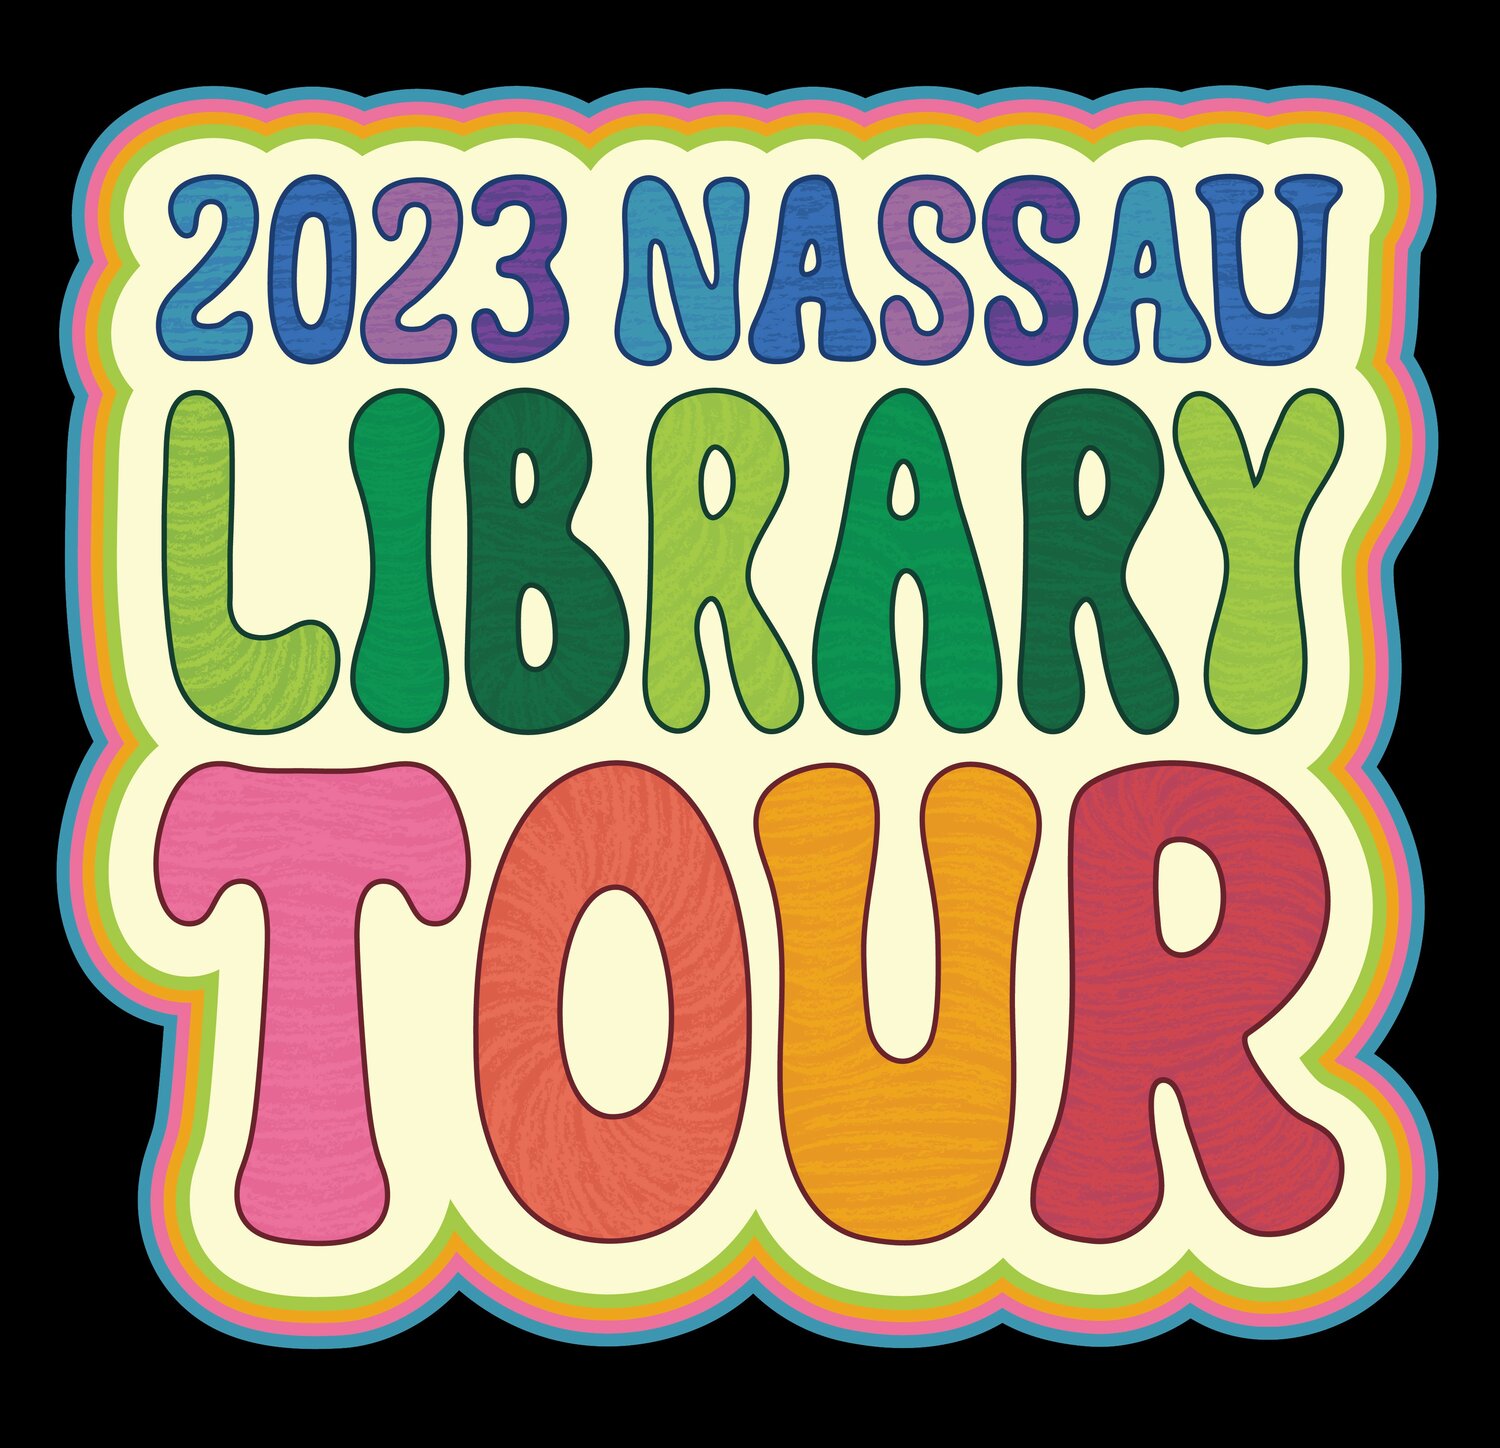 The Nassau Library Tour 2023 inspired over 65,000 library visits.